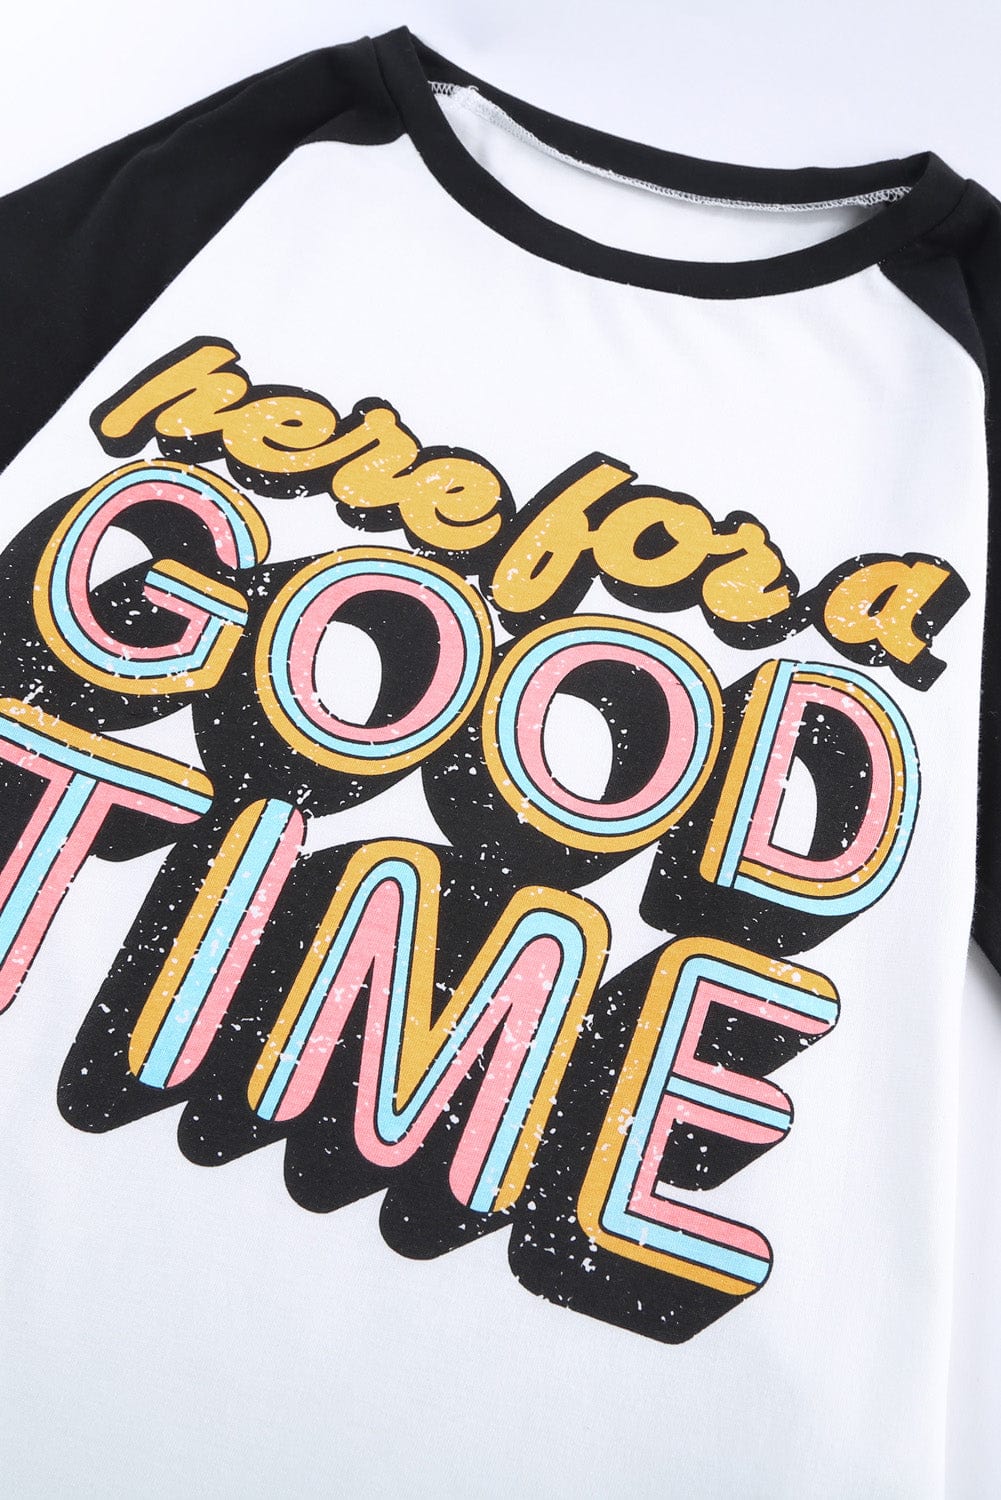 HERE FOR A GOOD TIME Tee Shirt - Body By J'ne